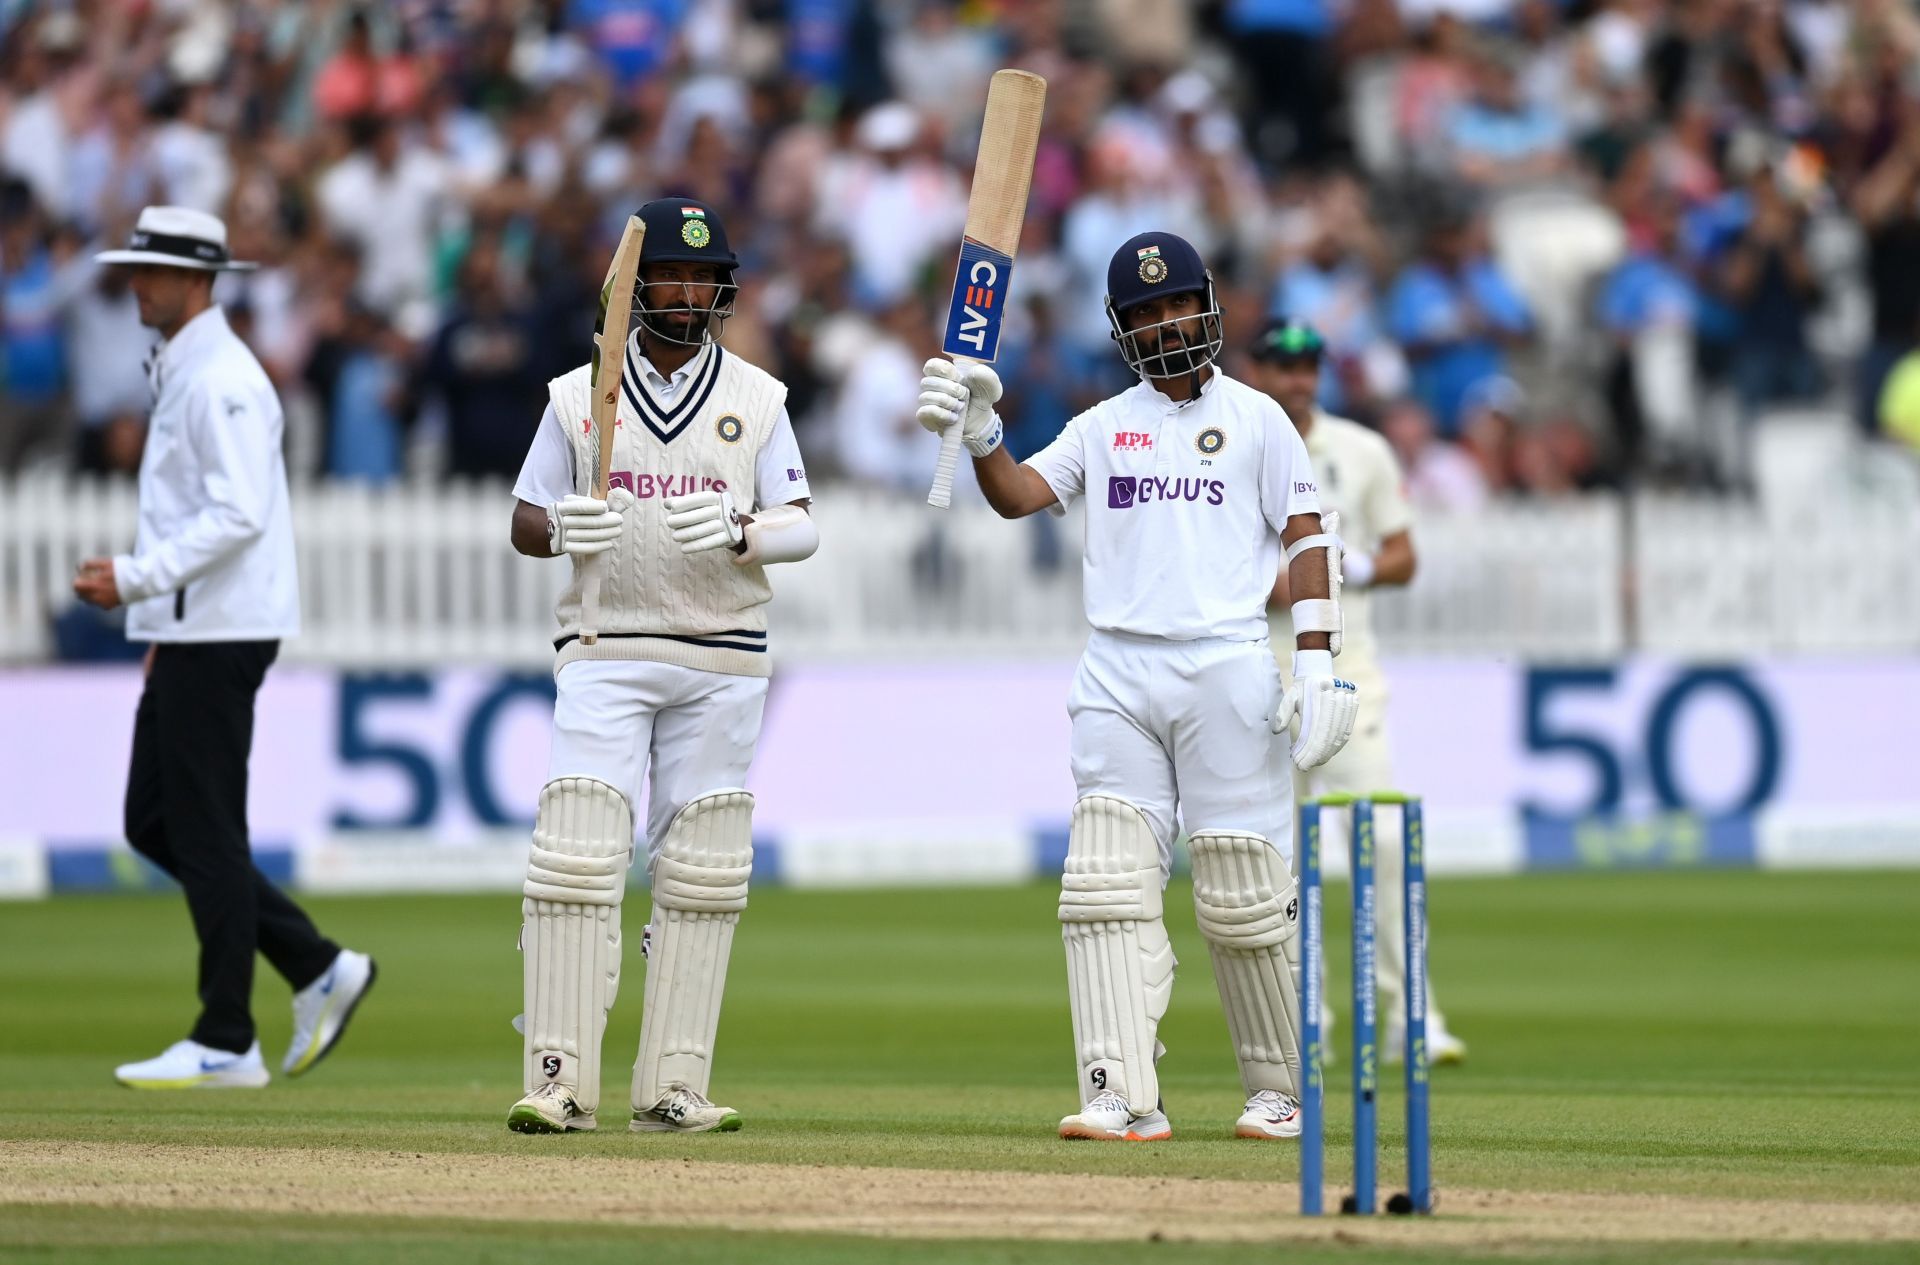 Pujara and Rahane have shared a well compiled 44 run stand for the third wicket.